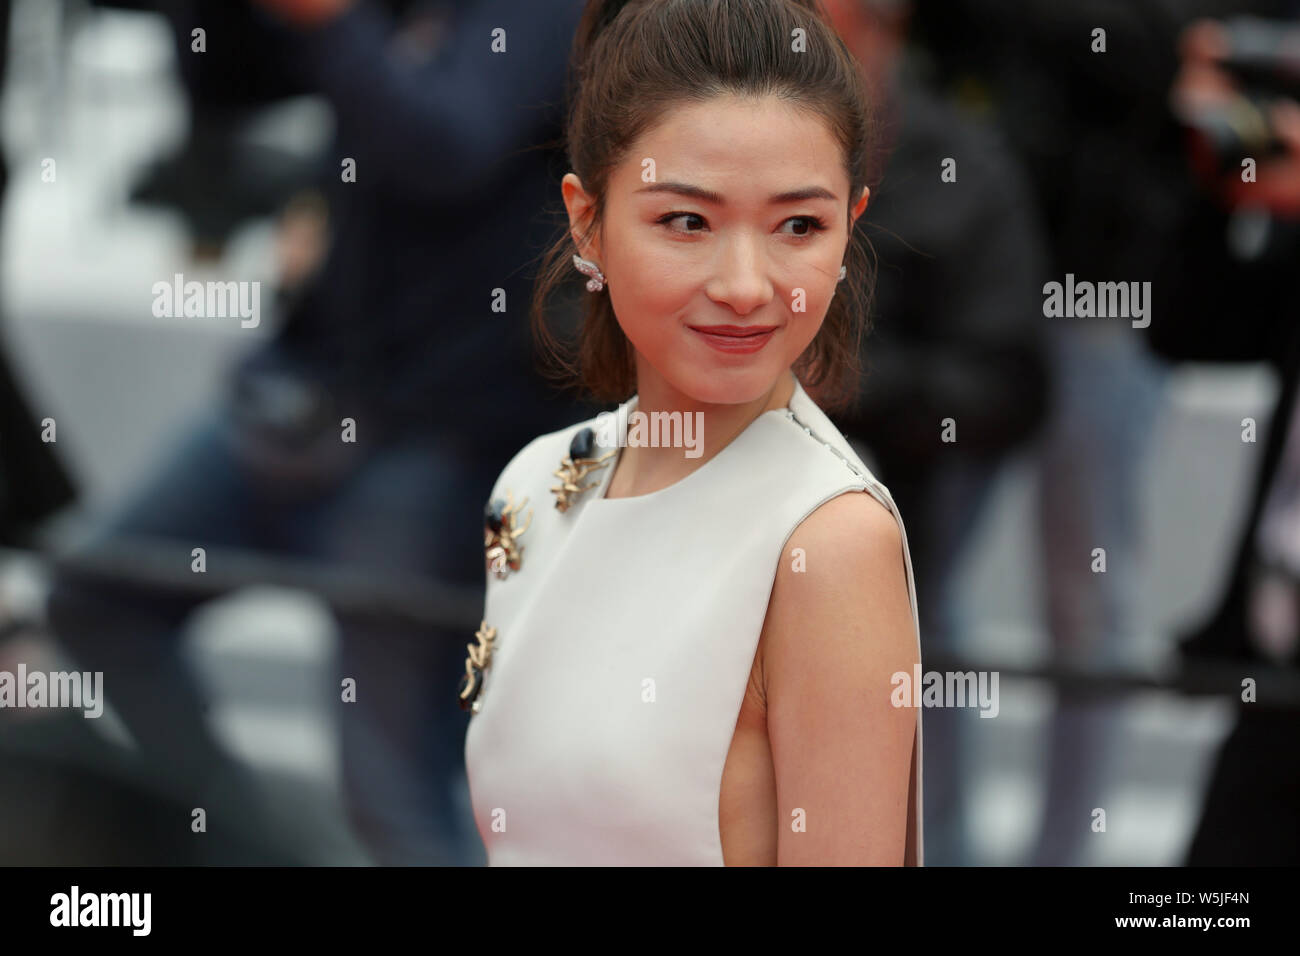 CANNES, FRANCE - MAY 18: Wan Qian attends The Wild Goose Lake screening during the 72nd Cannes Film Festival (Mickael Chavet) Stock Photo